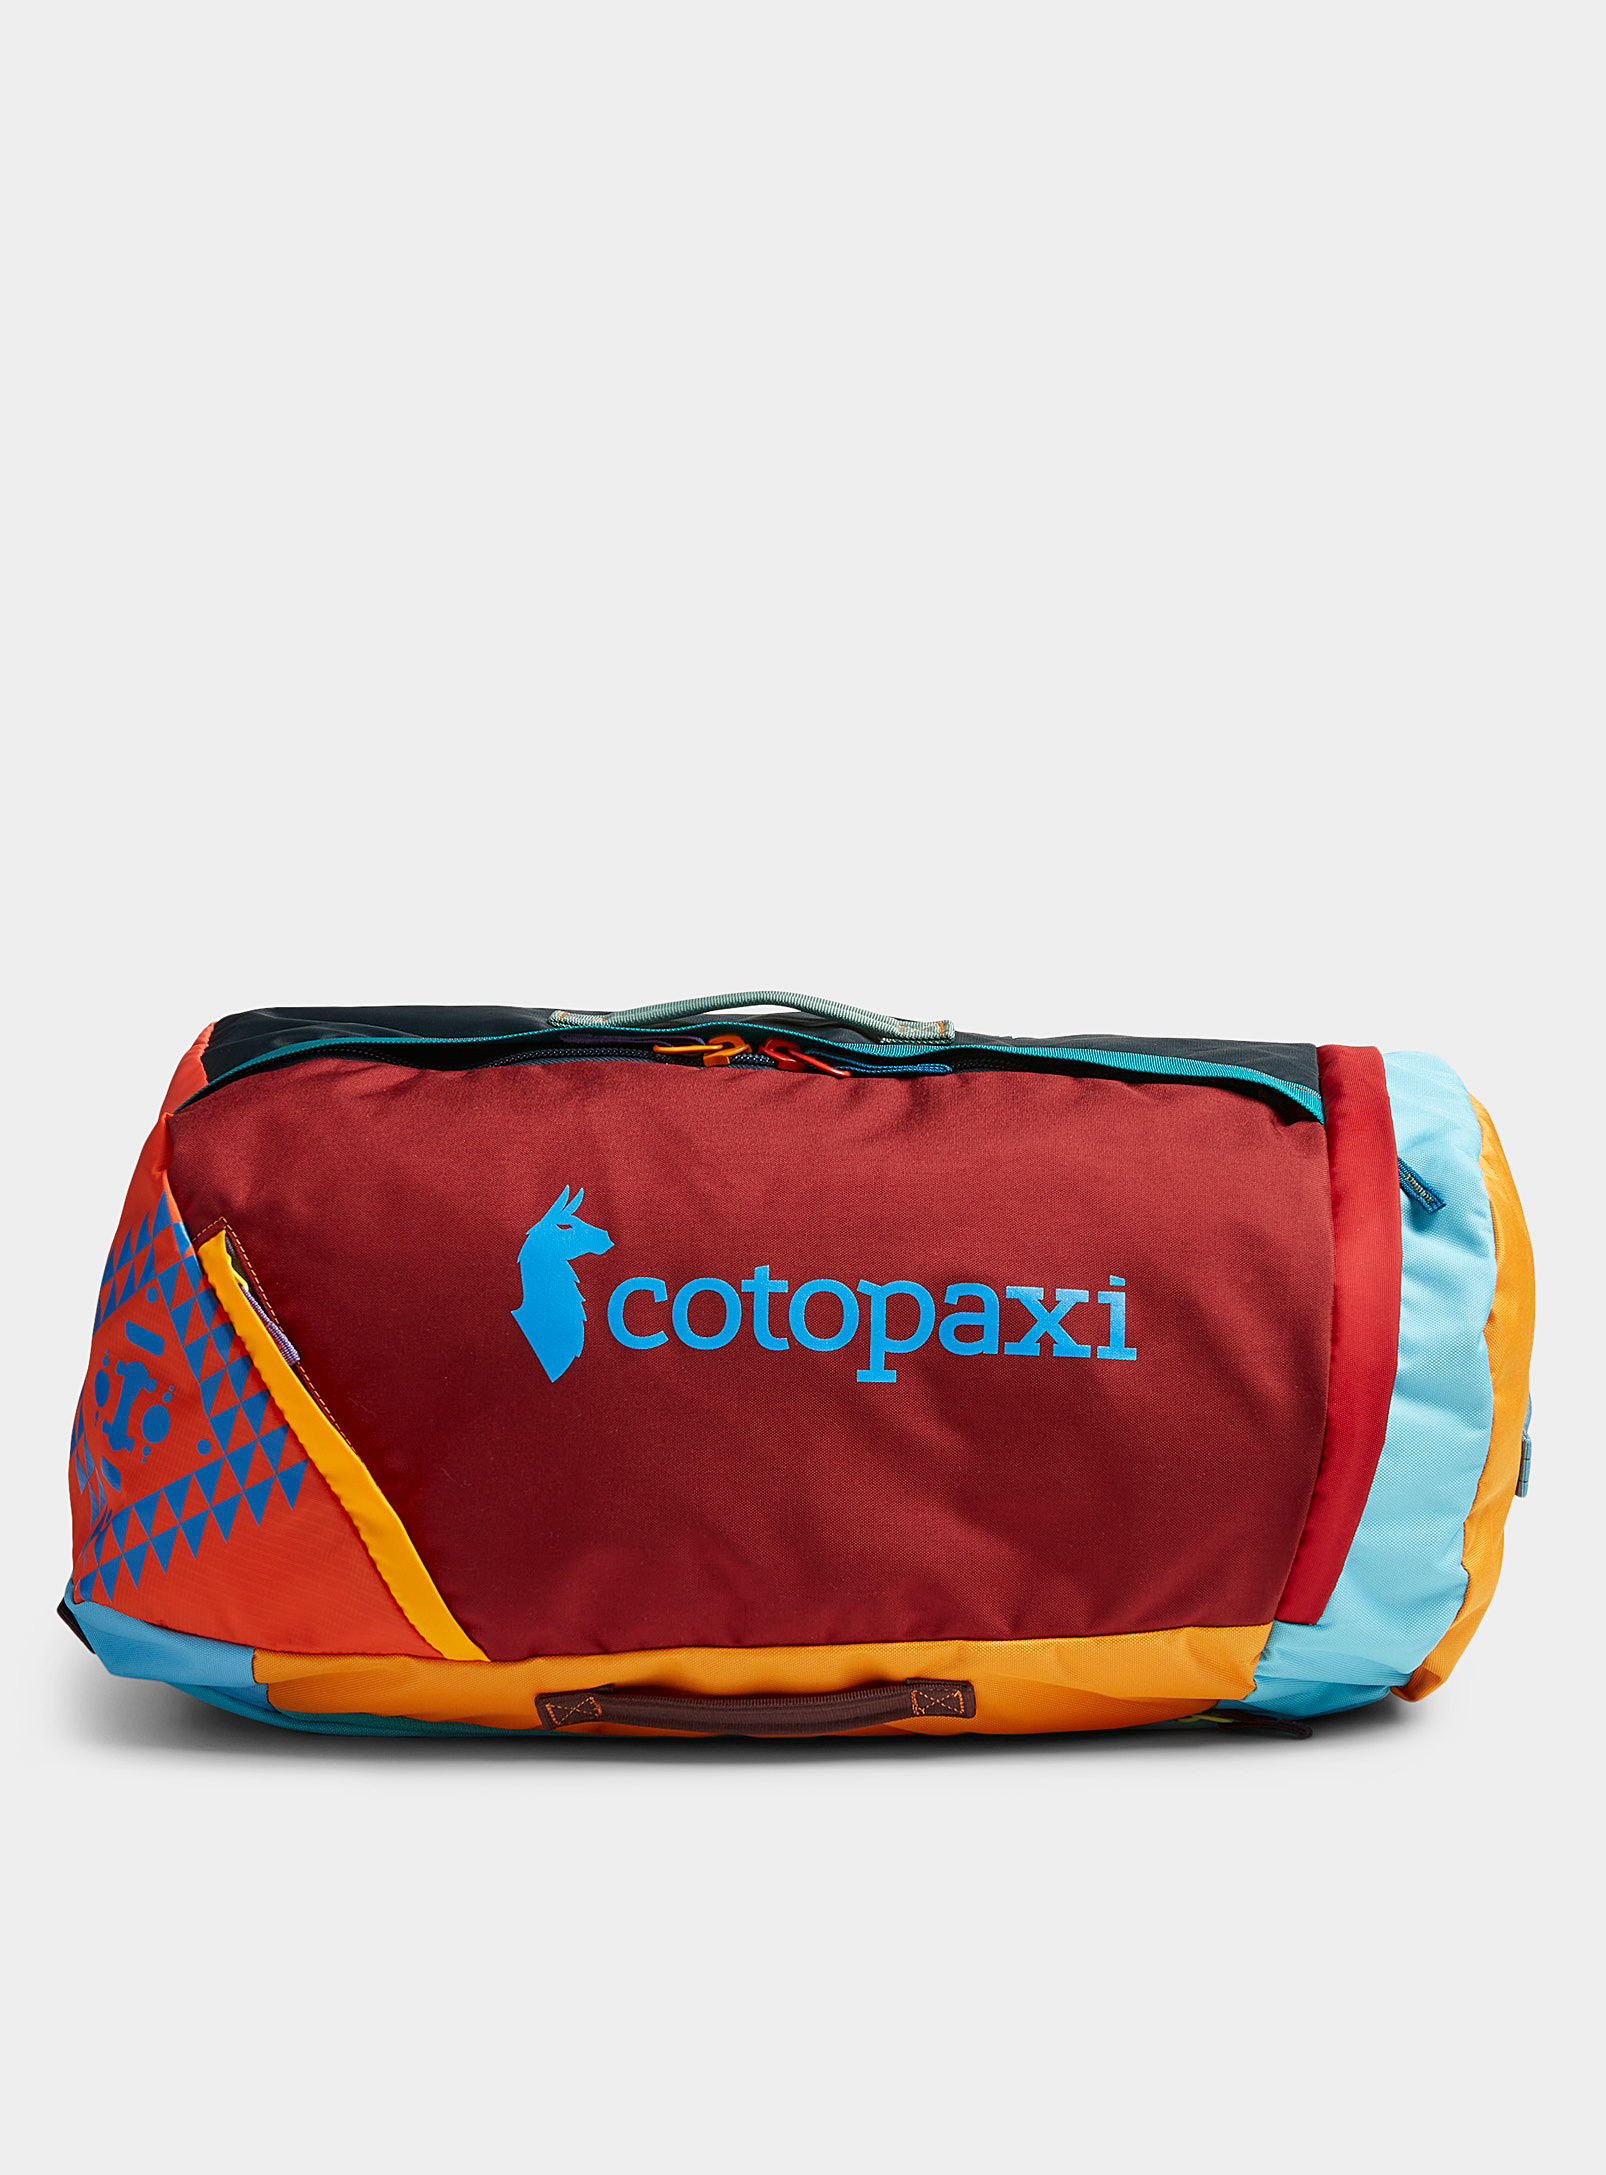 Cotopaxi - Men's Uyuni 36 L large sling bag One-of-a-kind colourways from the Del Da collection